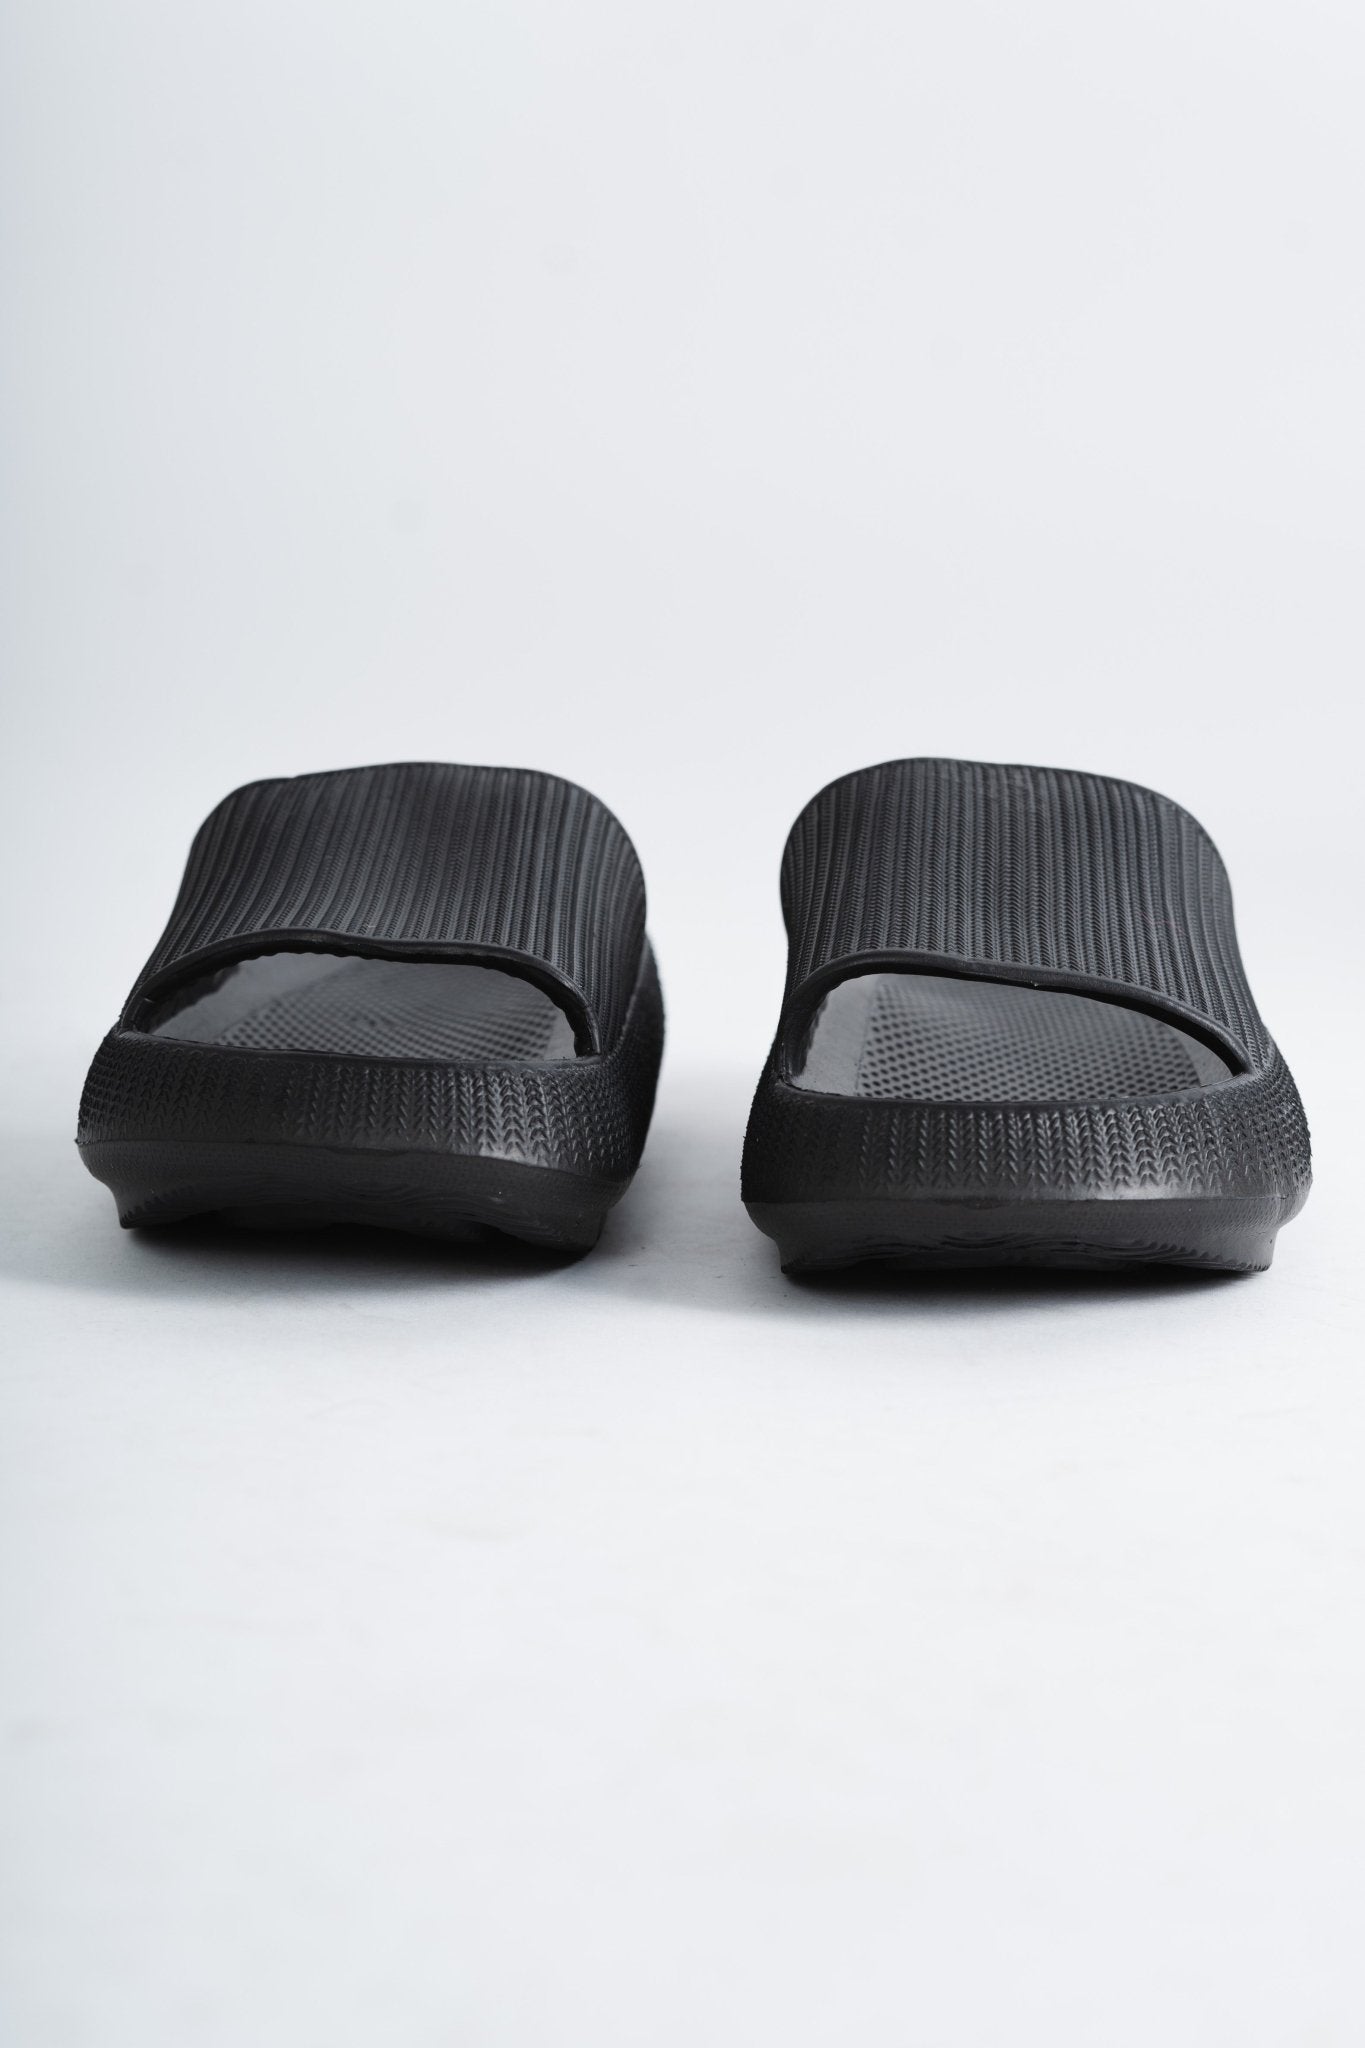 Eva pillow slides black - Stylish shoes - Trendy Staycation Outfits at Lush Fashion Lounge Boutique in Oklahoma City